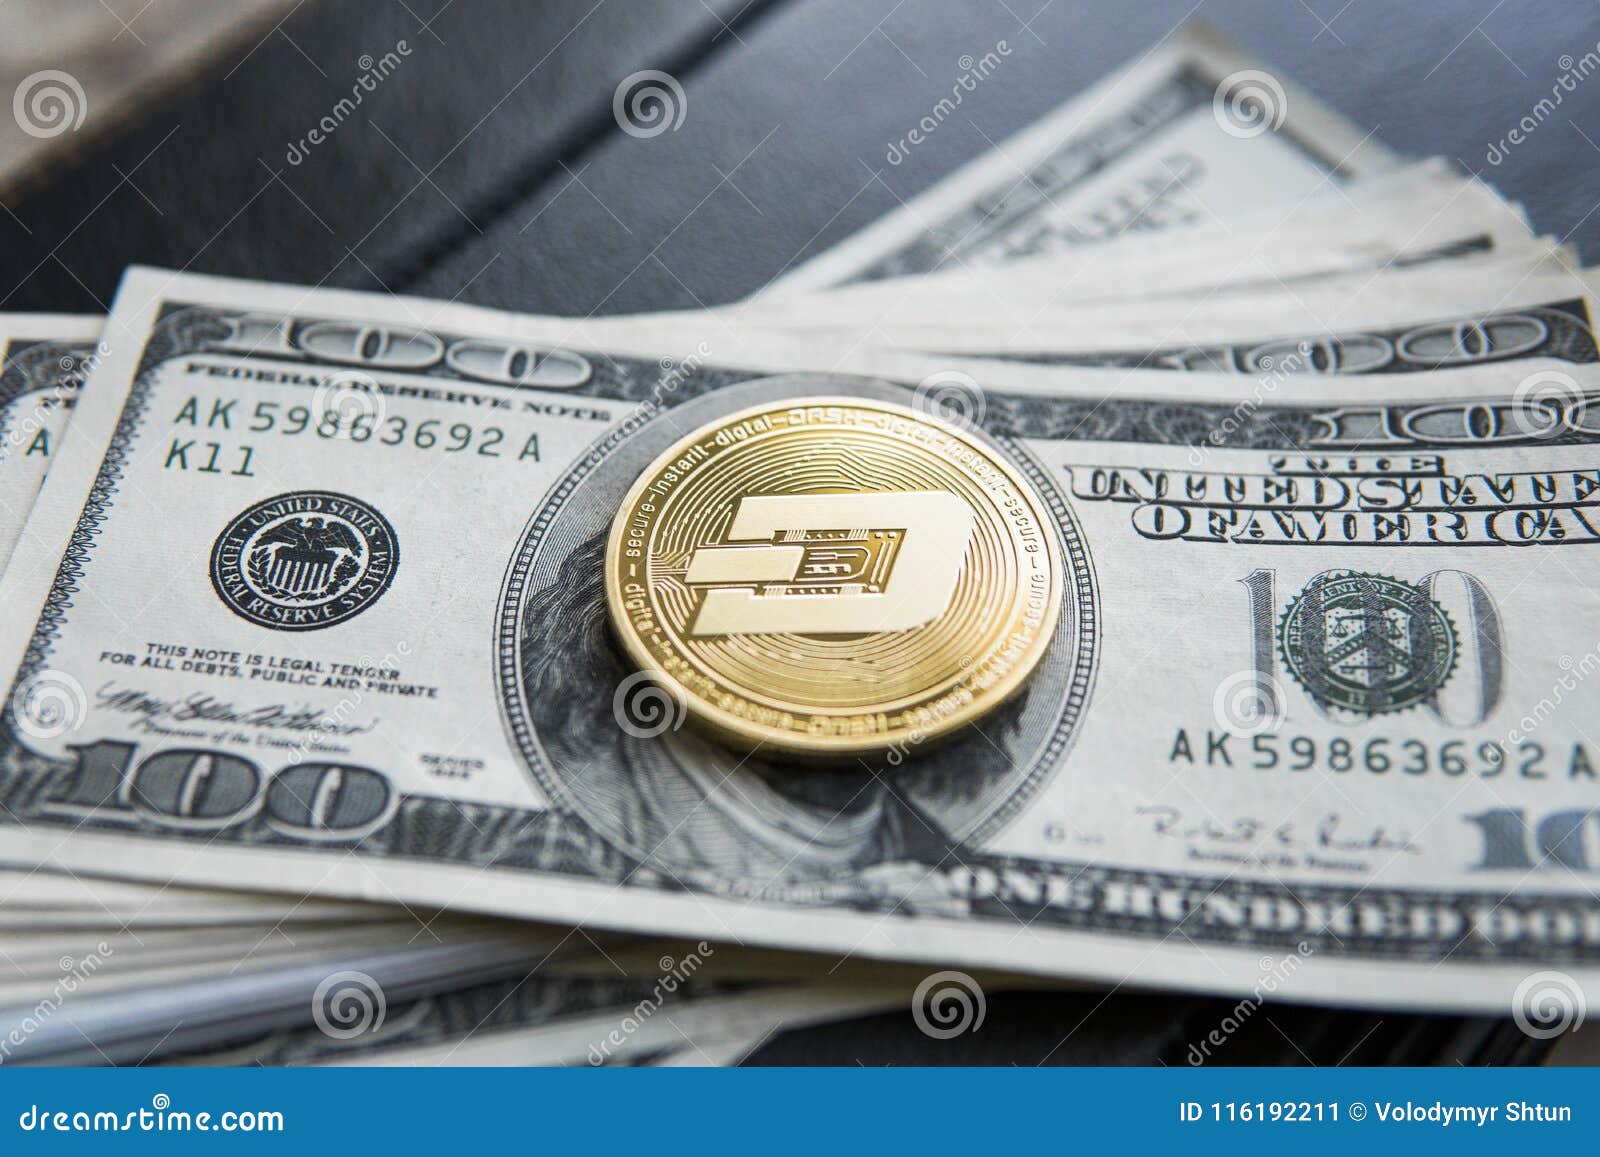 Golden Dash Cryptocurrency Coin On A Pile Of US Dollars ...